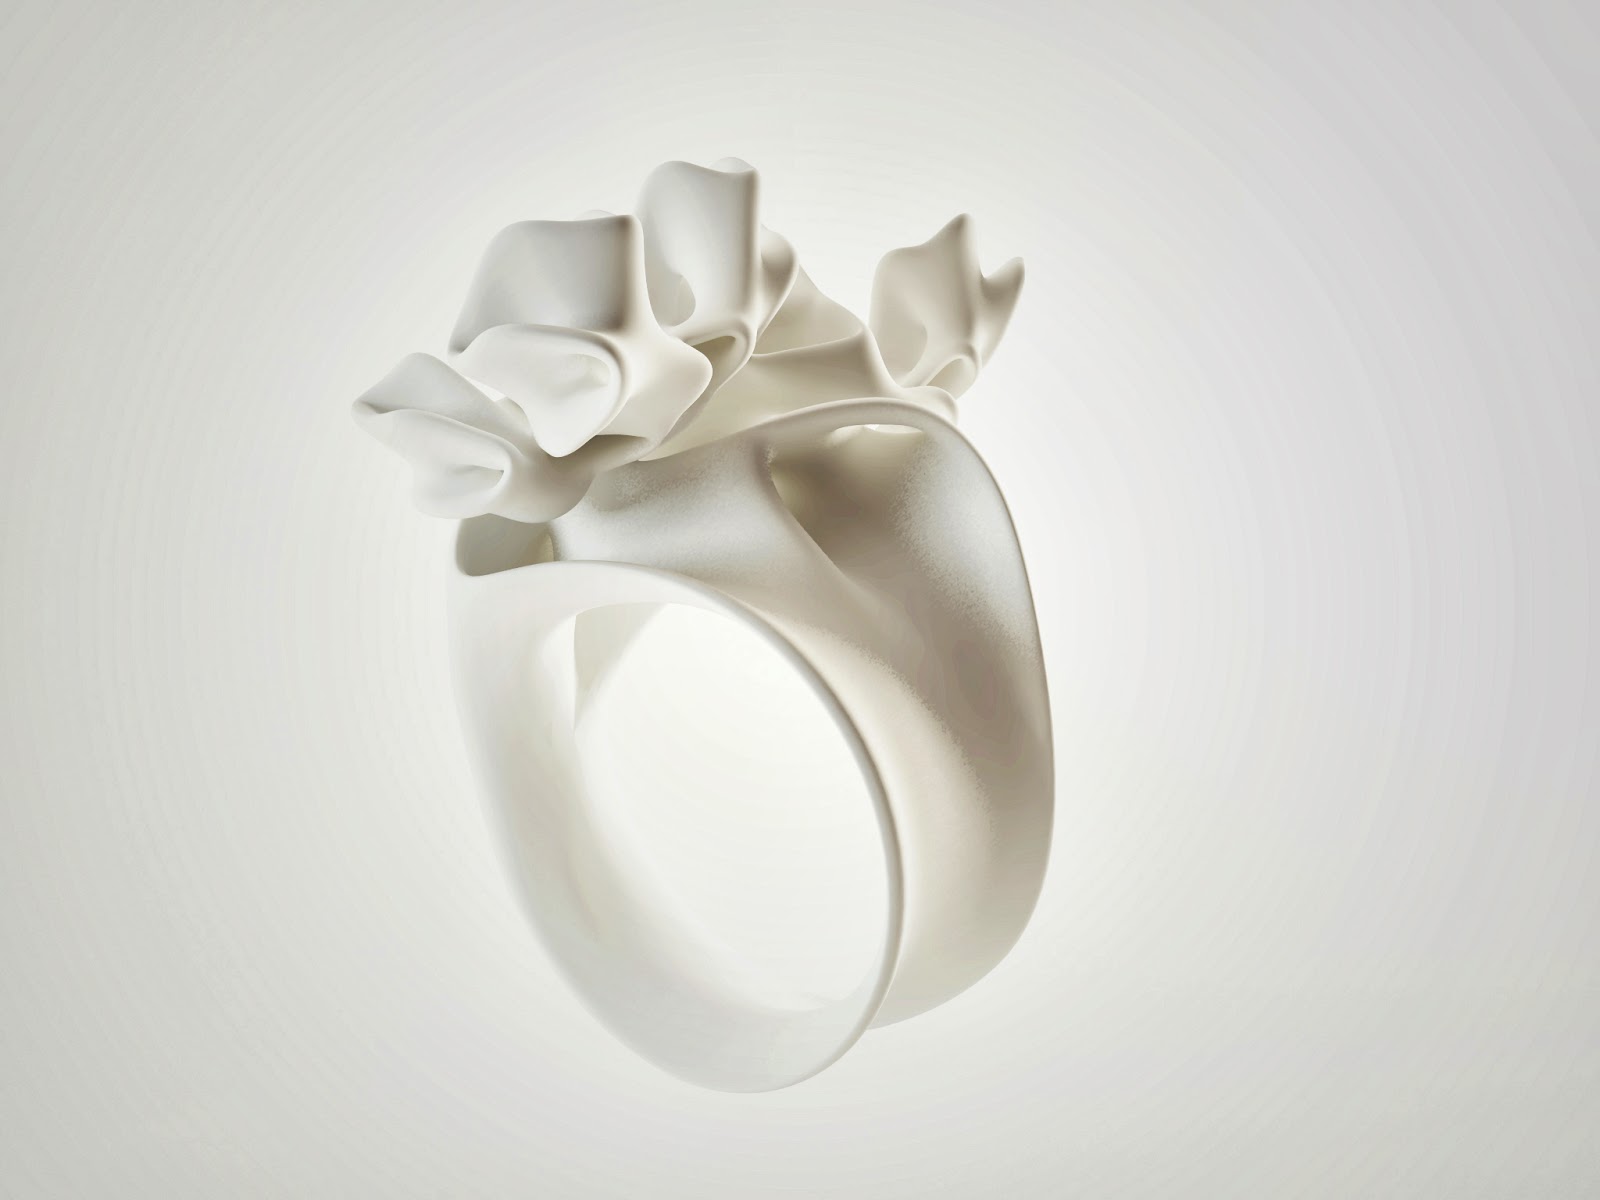 synthetic morphologies: Ring_000_